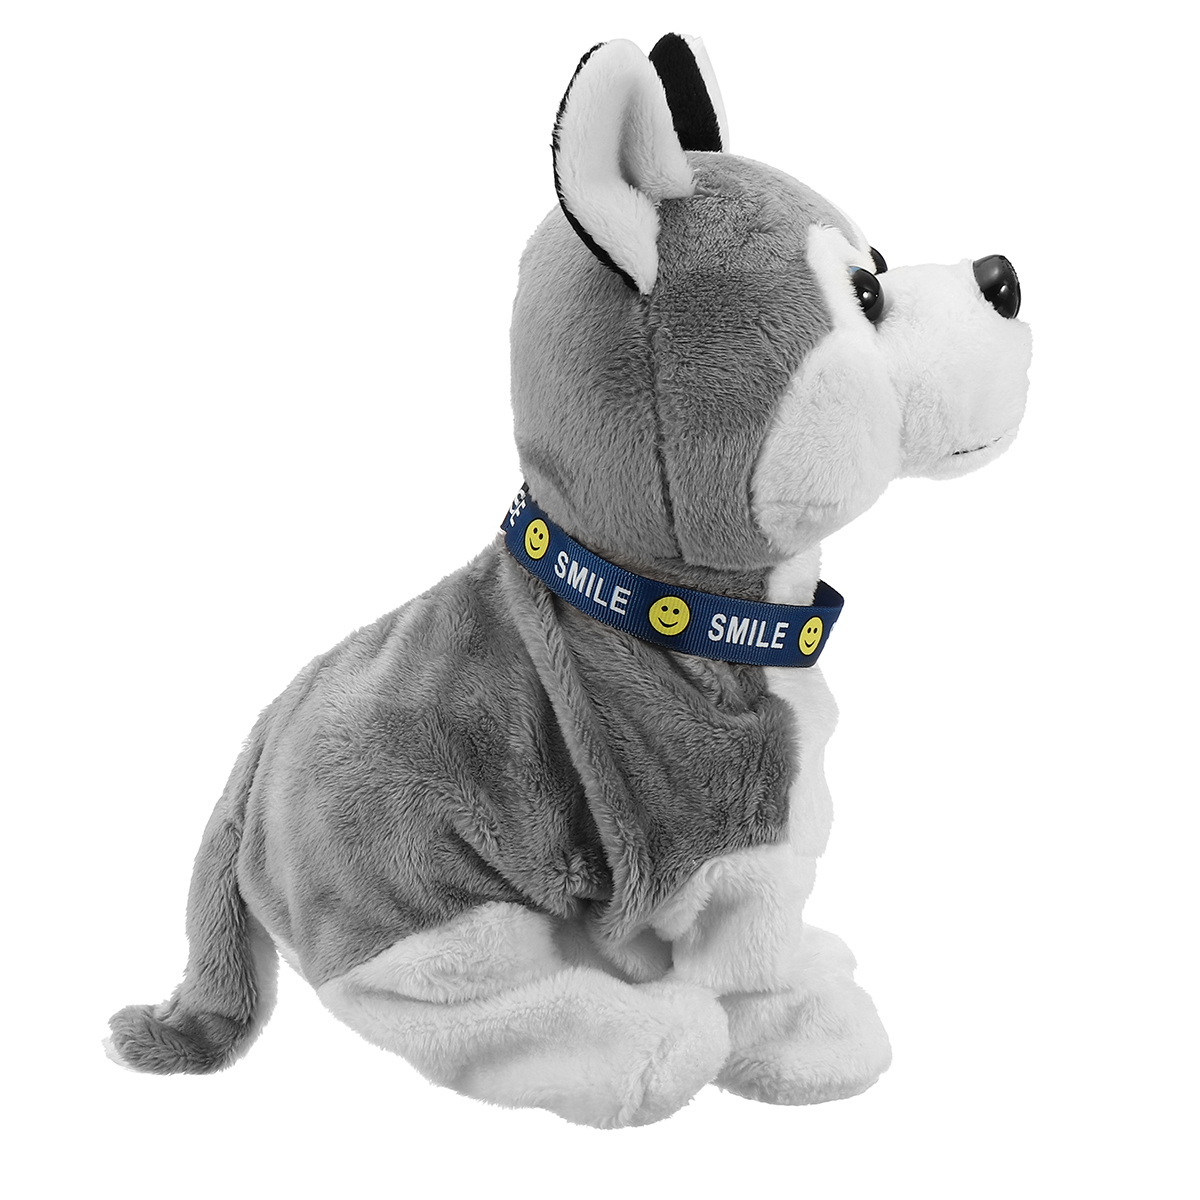 Interactive-Dog-Electronic-Pet-Stuffed-Plush-Toy-Control-Walk-Sound-Husky-Reacts-Touch-1414452-3